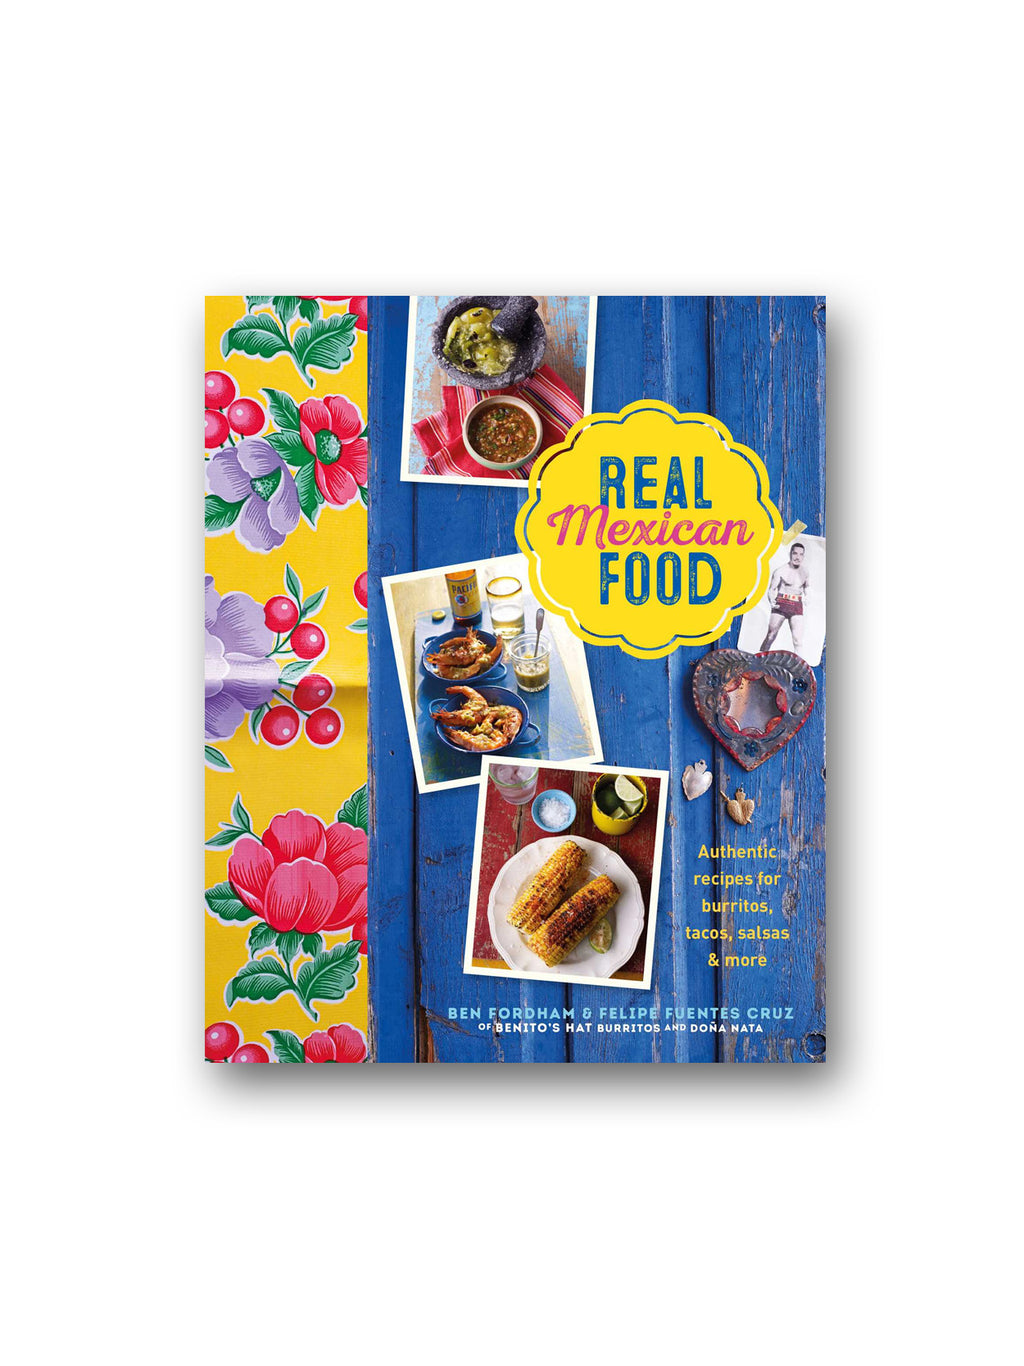 Real Mexican Food : Authentic Recipes for Burritos, Tacos, Salsas and More